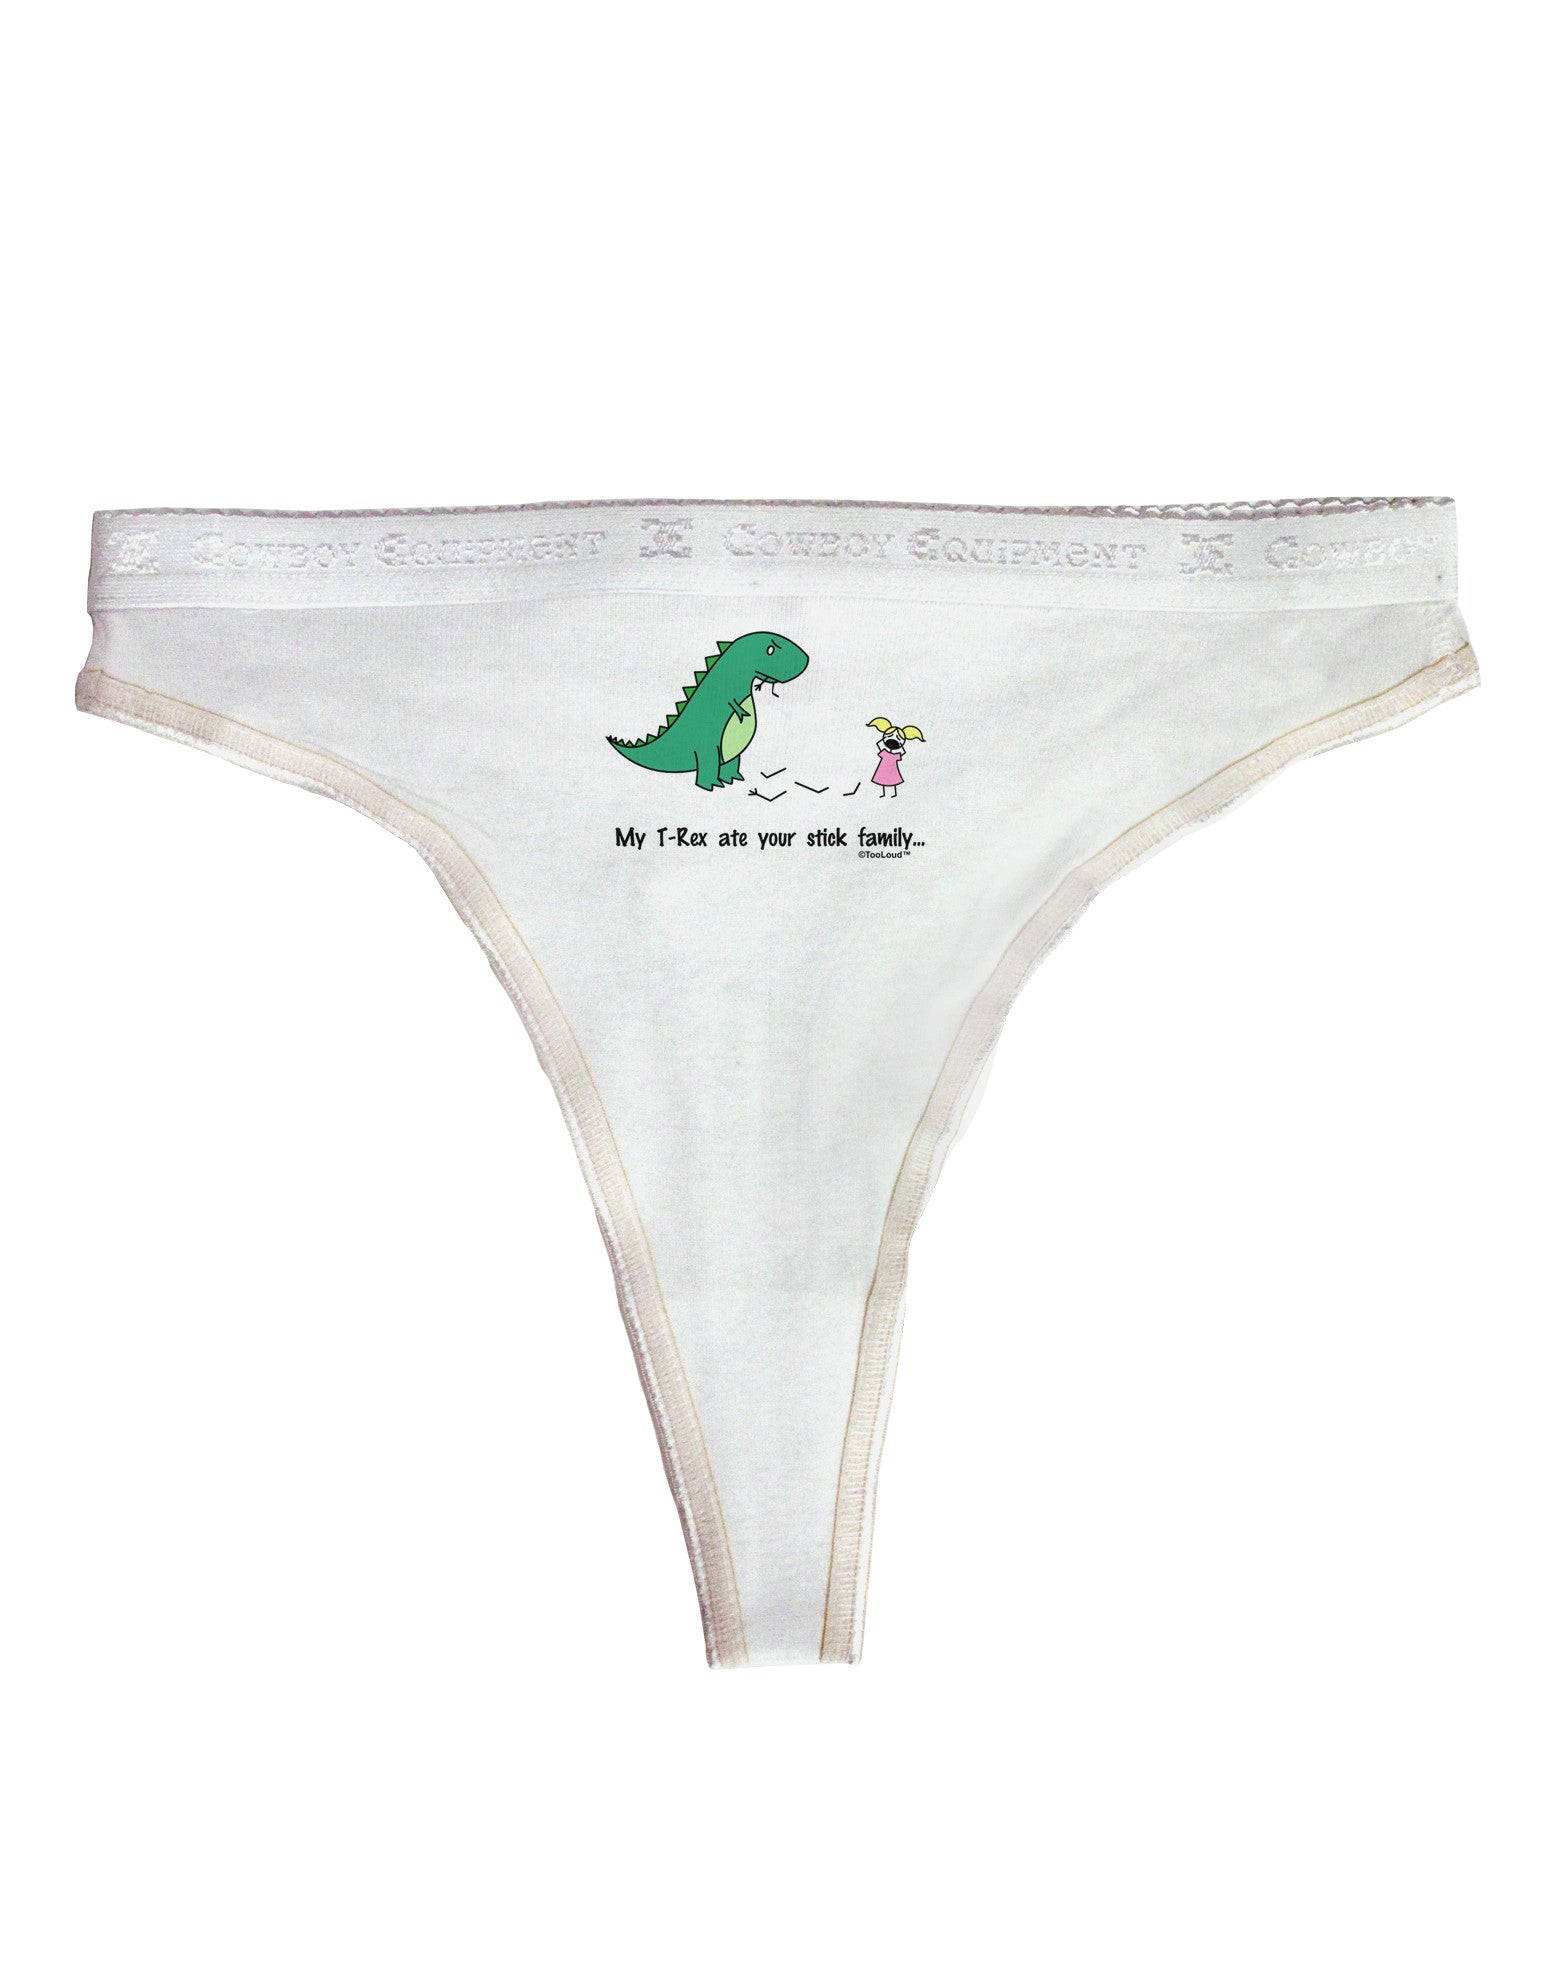 My T-Rex Ate Your Stick Family - Color Womens Thong Underwear by